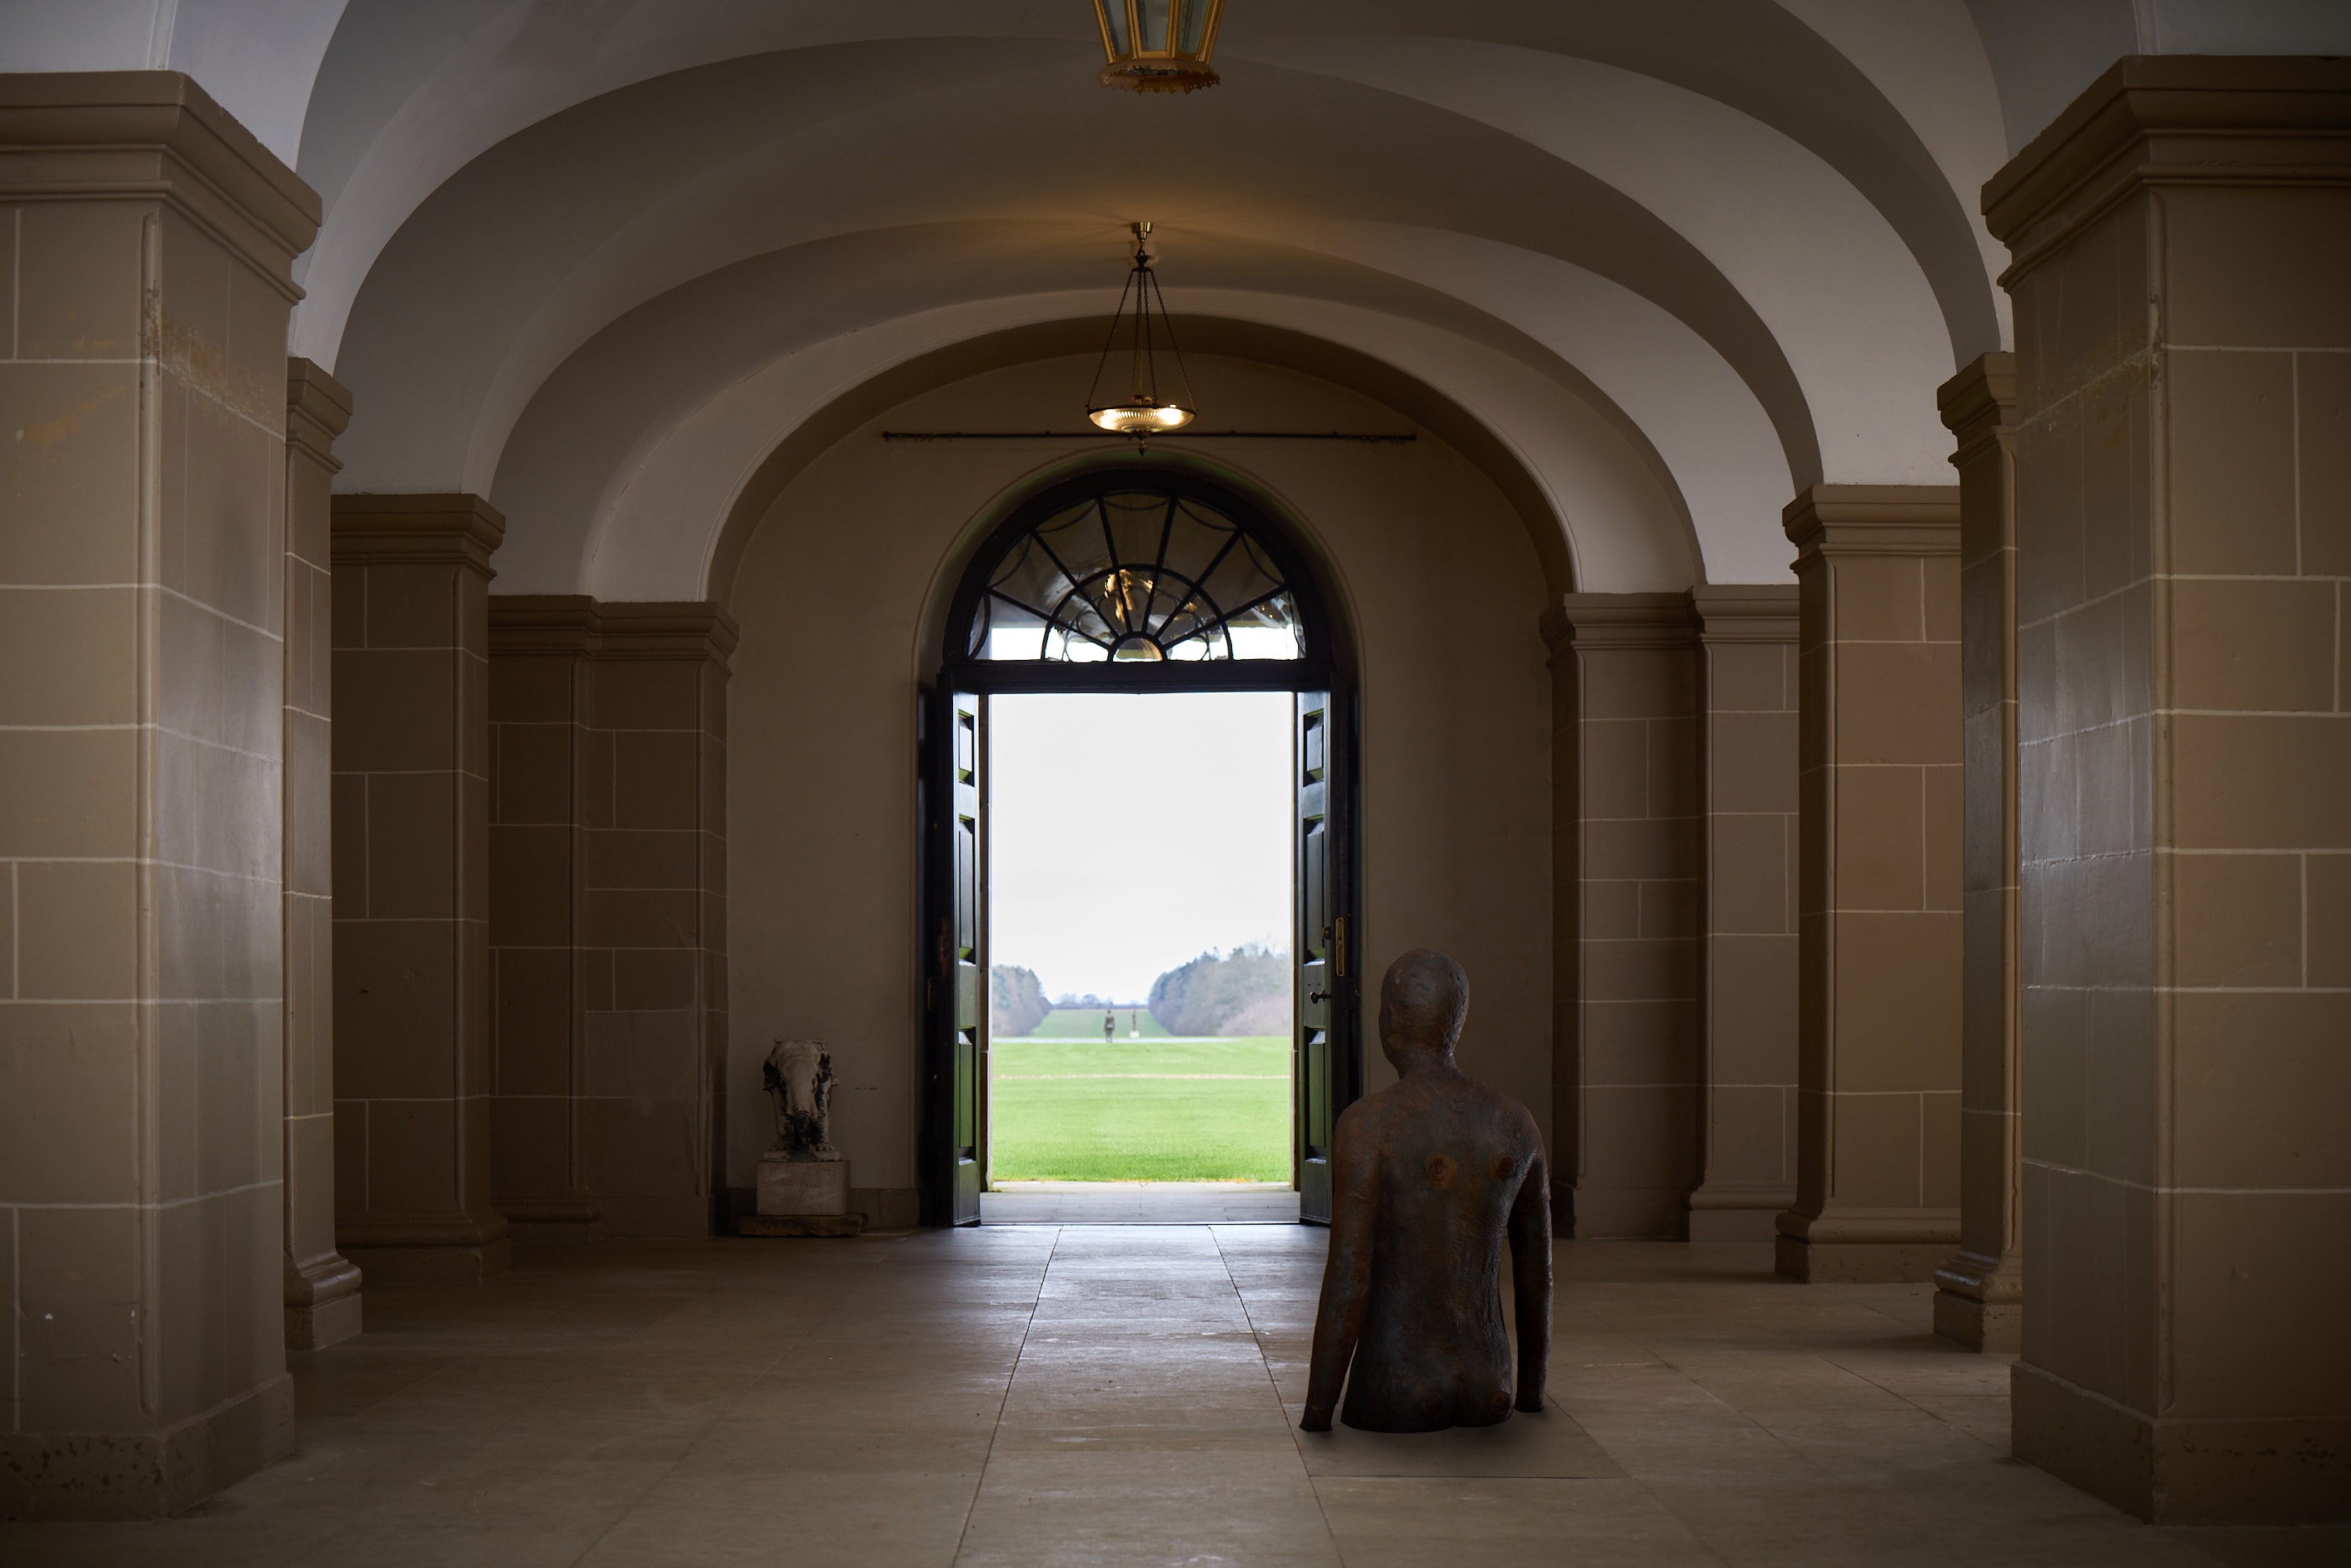 Antony Gormley’s iron men take a stand at Houghton Hall Review in the Financial Times